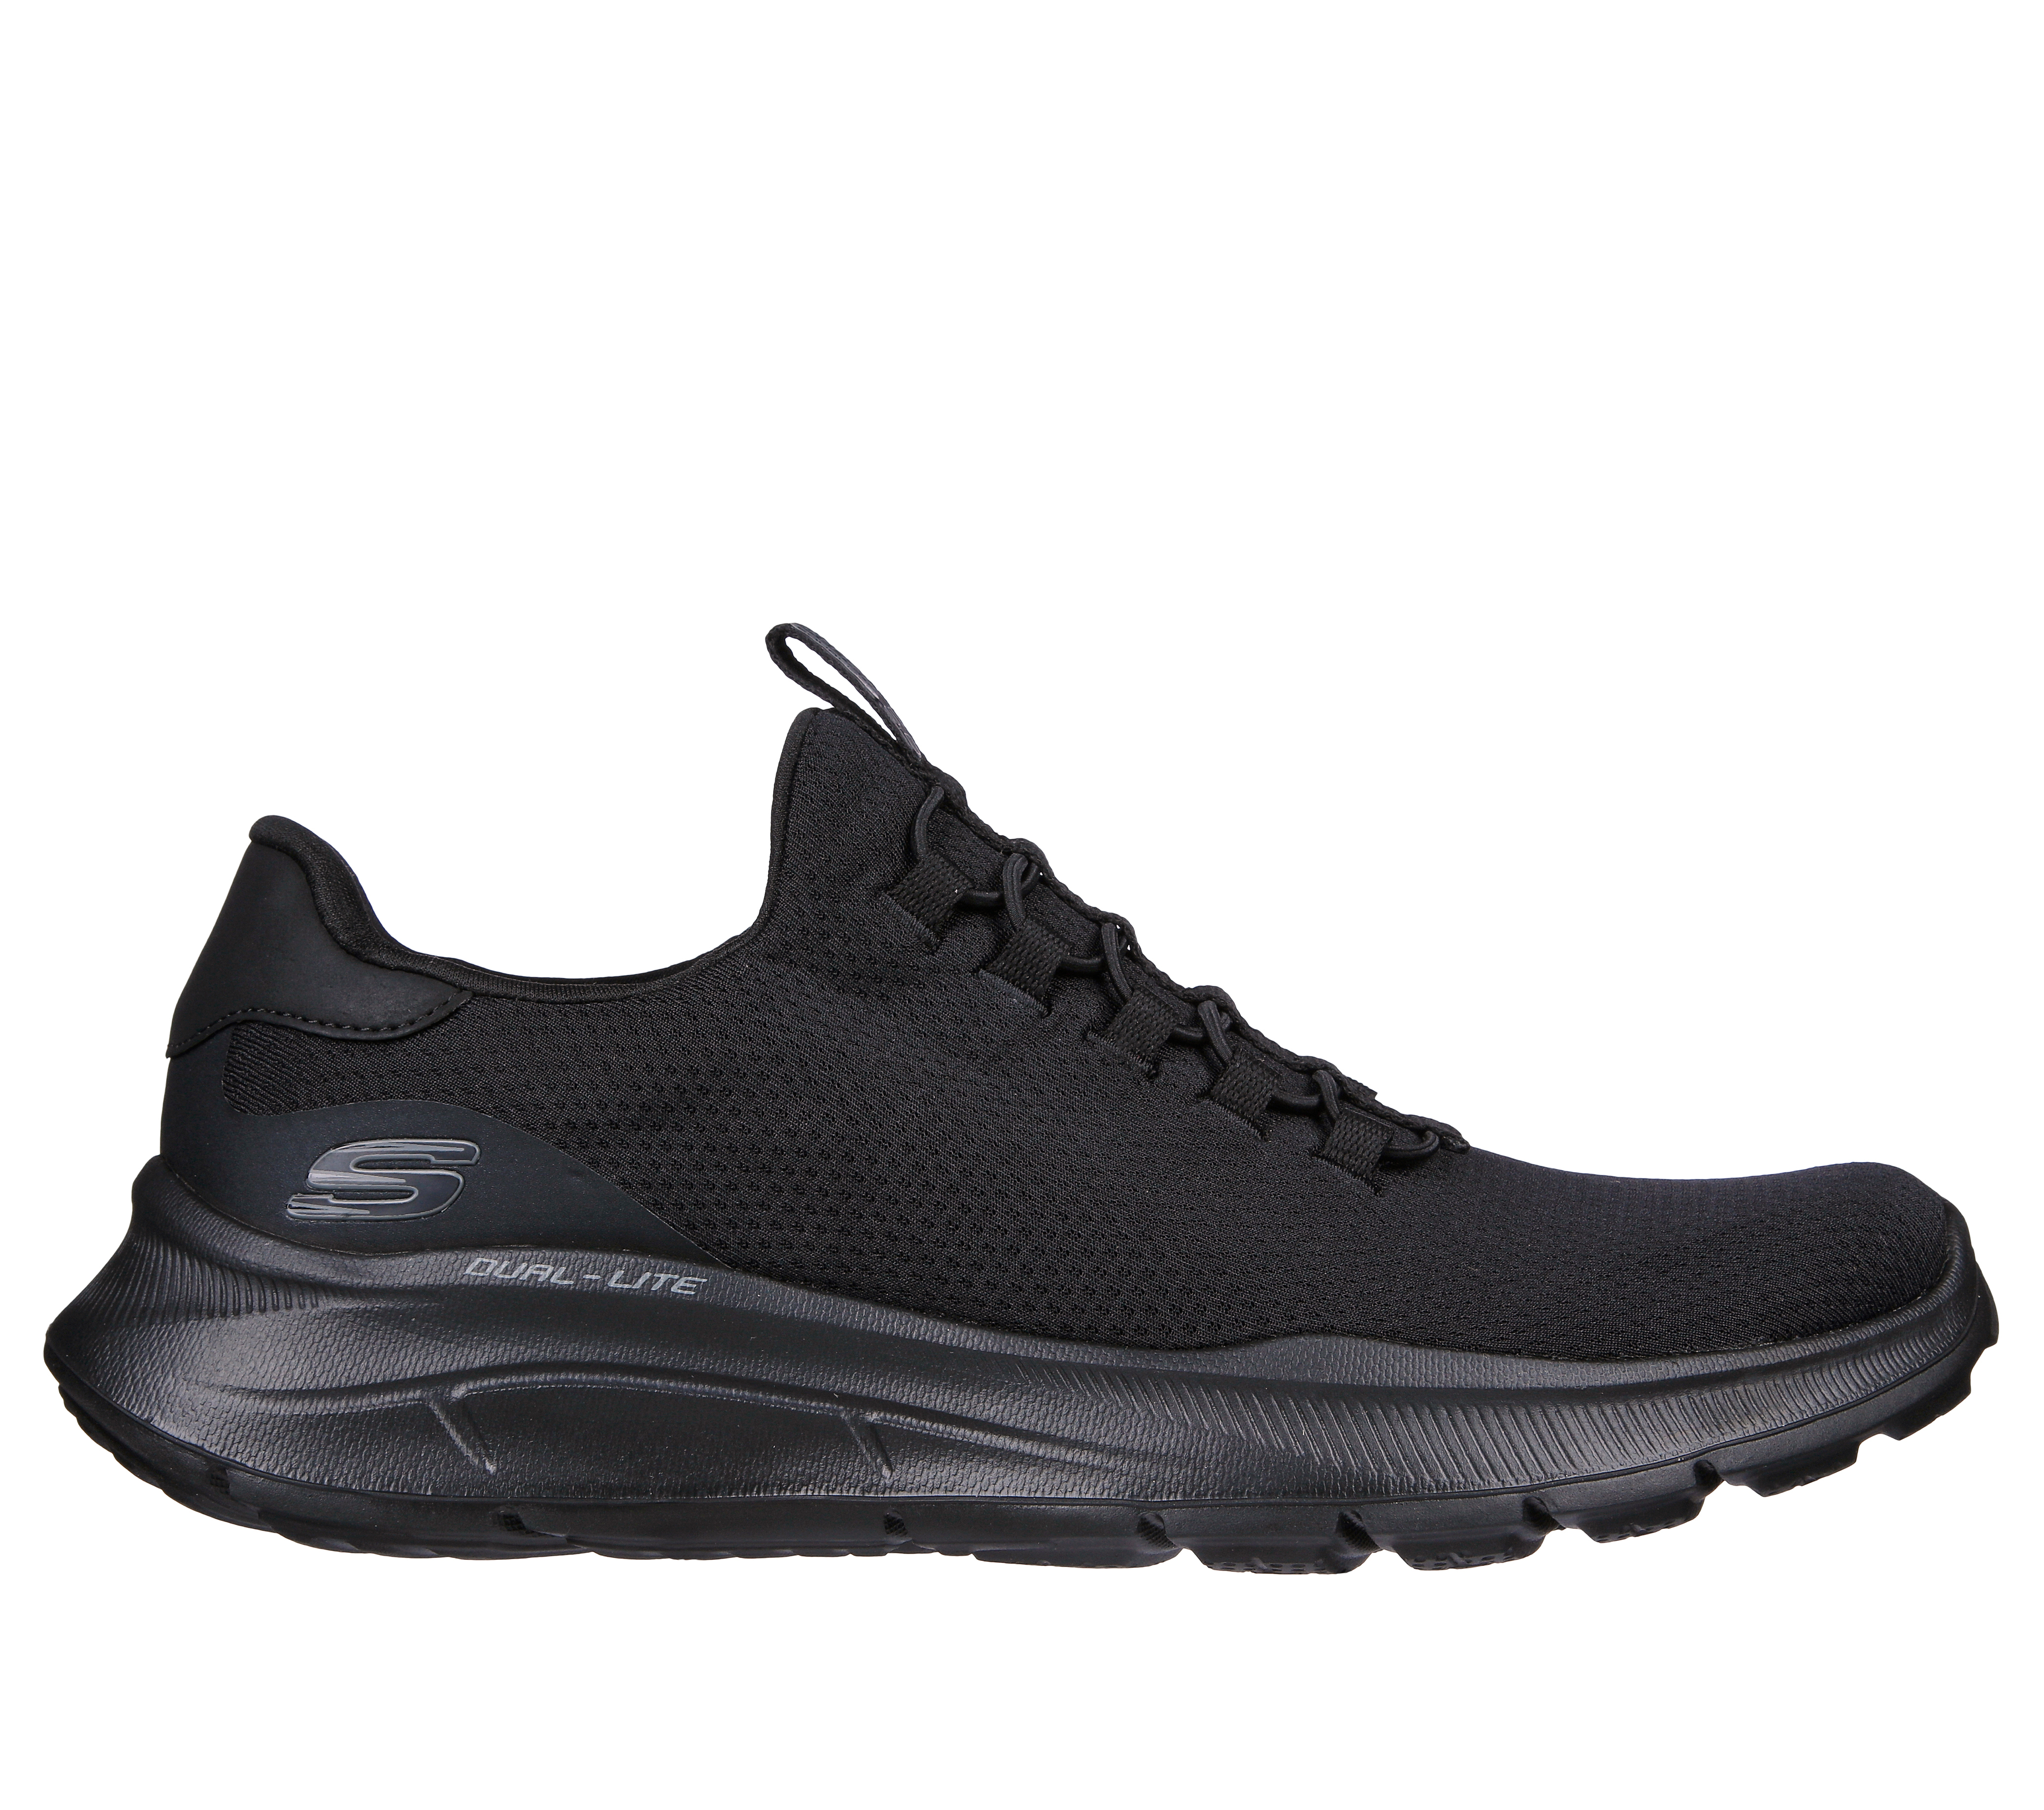 Fit: Lemba 5.0 - Relaxed SKECHERS Equalizer |